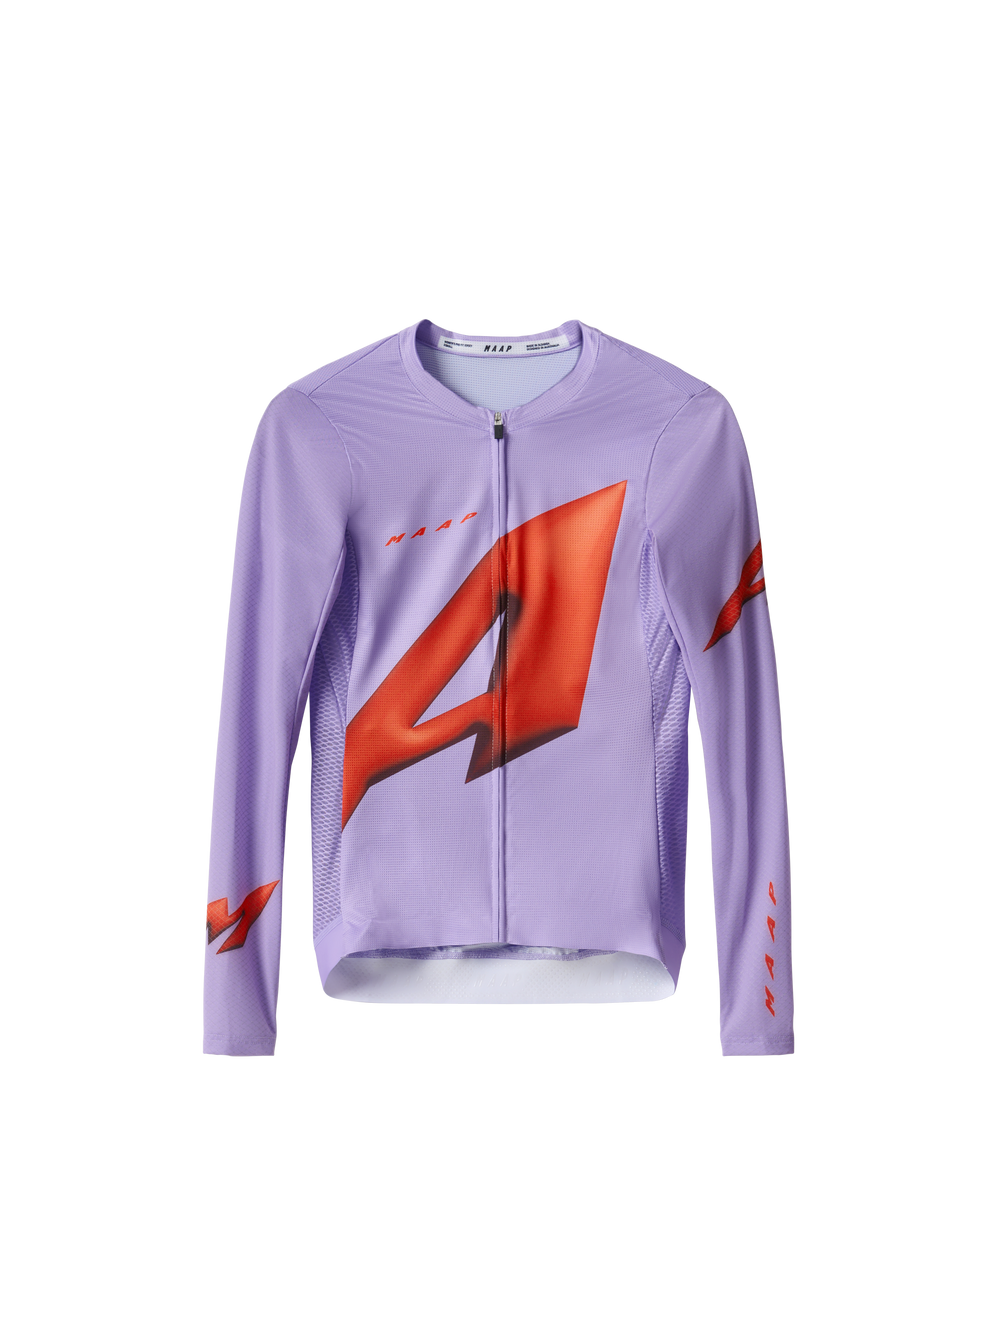 Product Image for Women's Orbit Pro Air LS Jersey